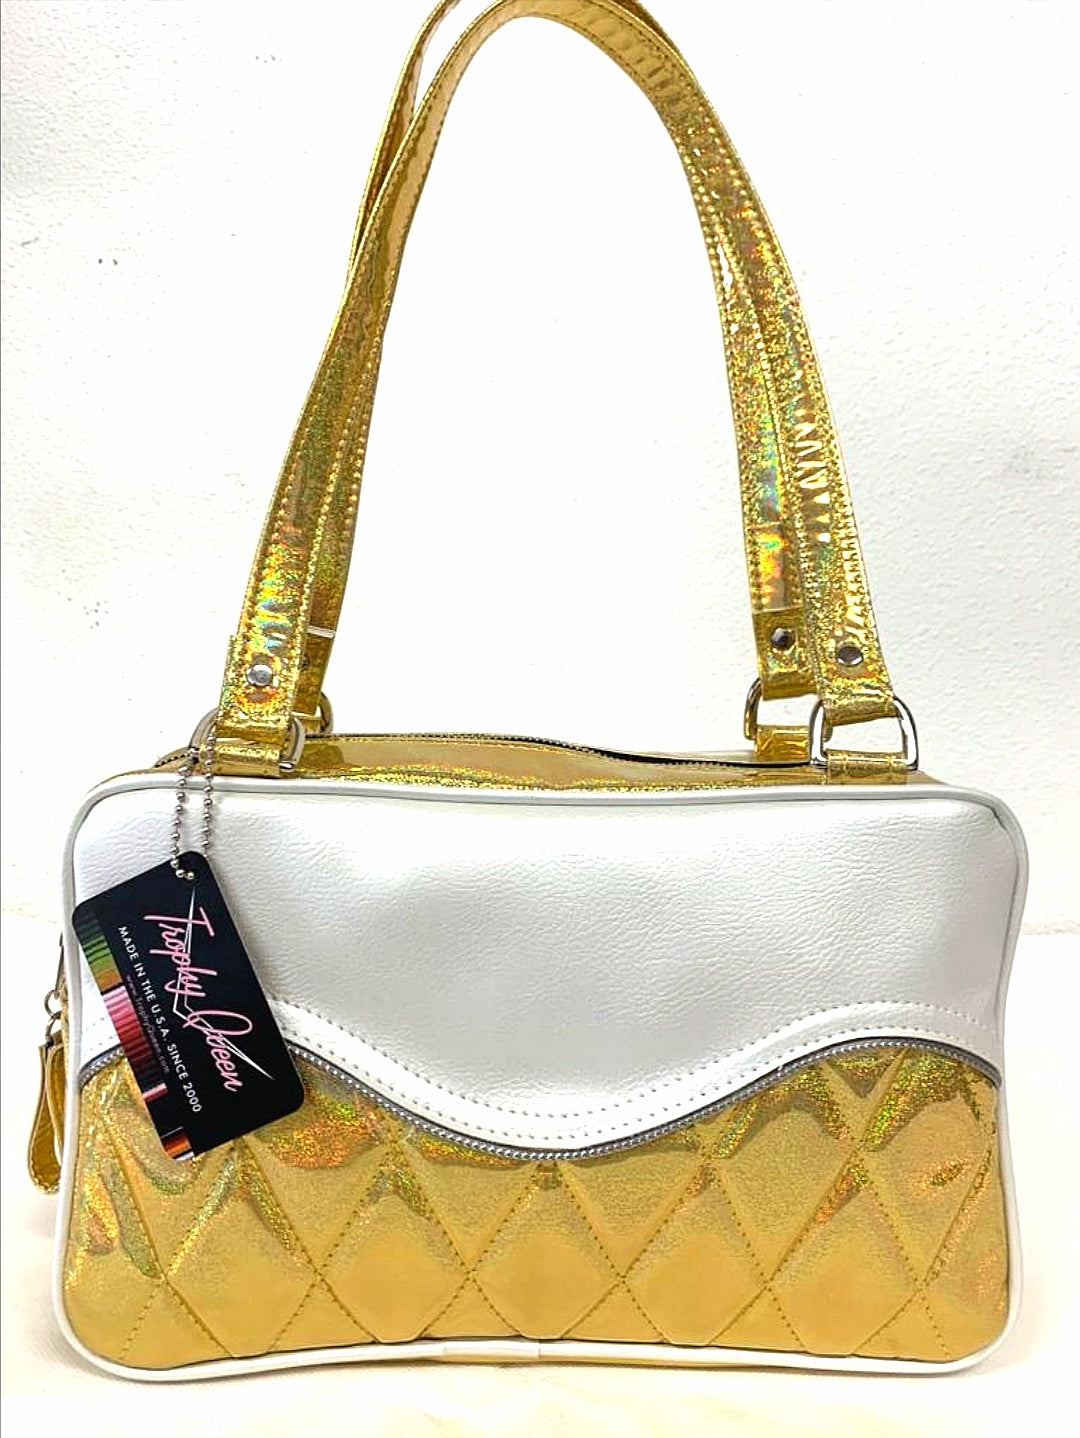 Limited Edition Color the Diamond Pleat Tuck and Roll Tote in Cosmic Gold Glitter and Pearl White Vinyl with plush leopard lining is handcrafted in California with nickel hardware and 25” straps plus it comes with replacement straps. Inside open divided pocket and inside zipper pocket with serial number hidden inside. Nickel feet, vinyl zipper pull, and signature Trophy Queen Label included. The perfect size bag for any trip!